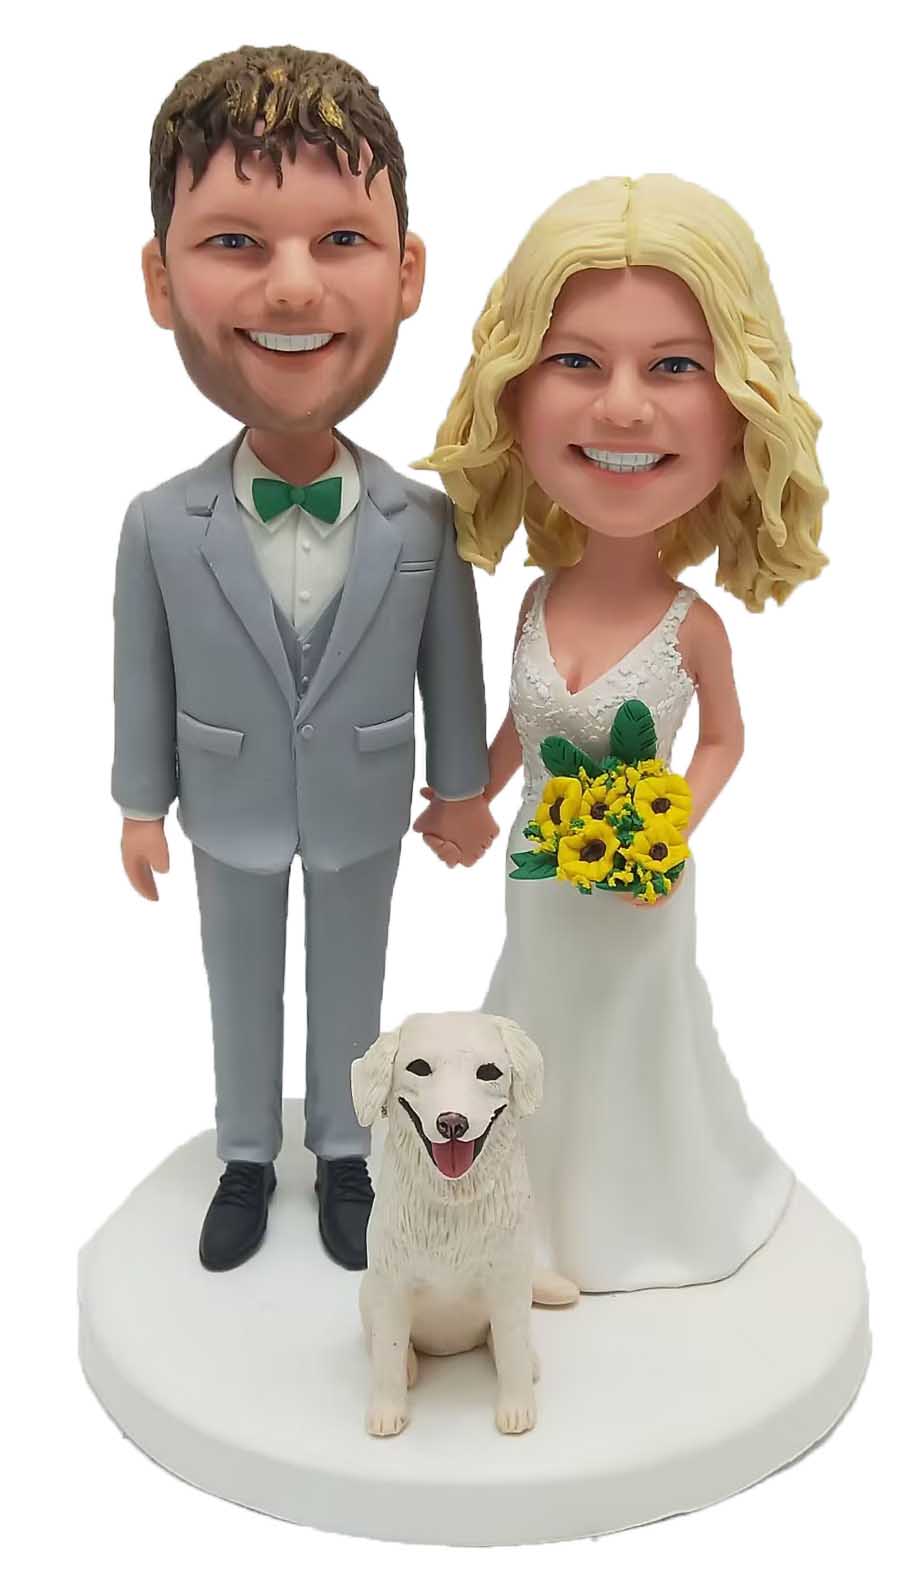 personalized wedding cake topper create your own cake toppers